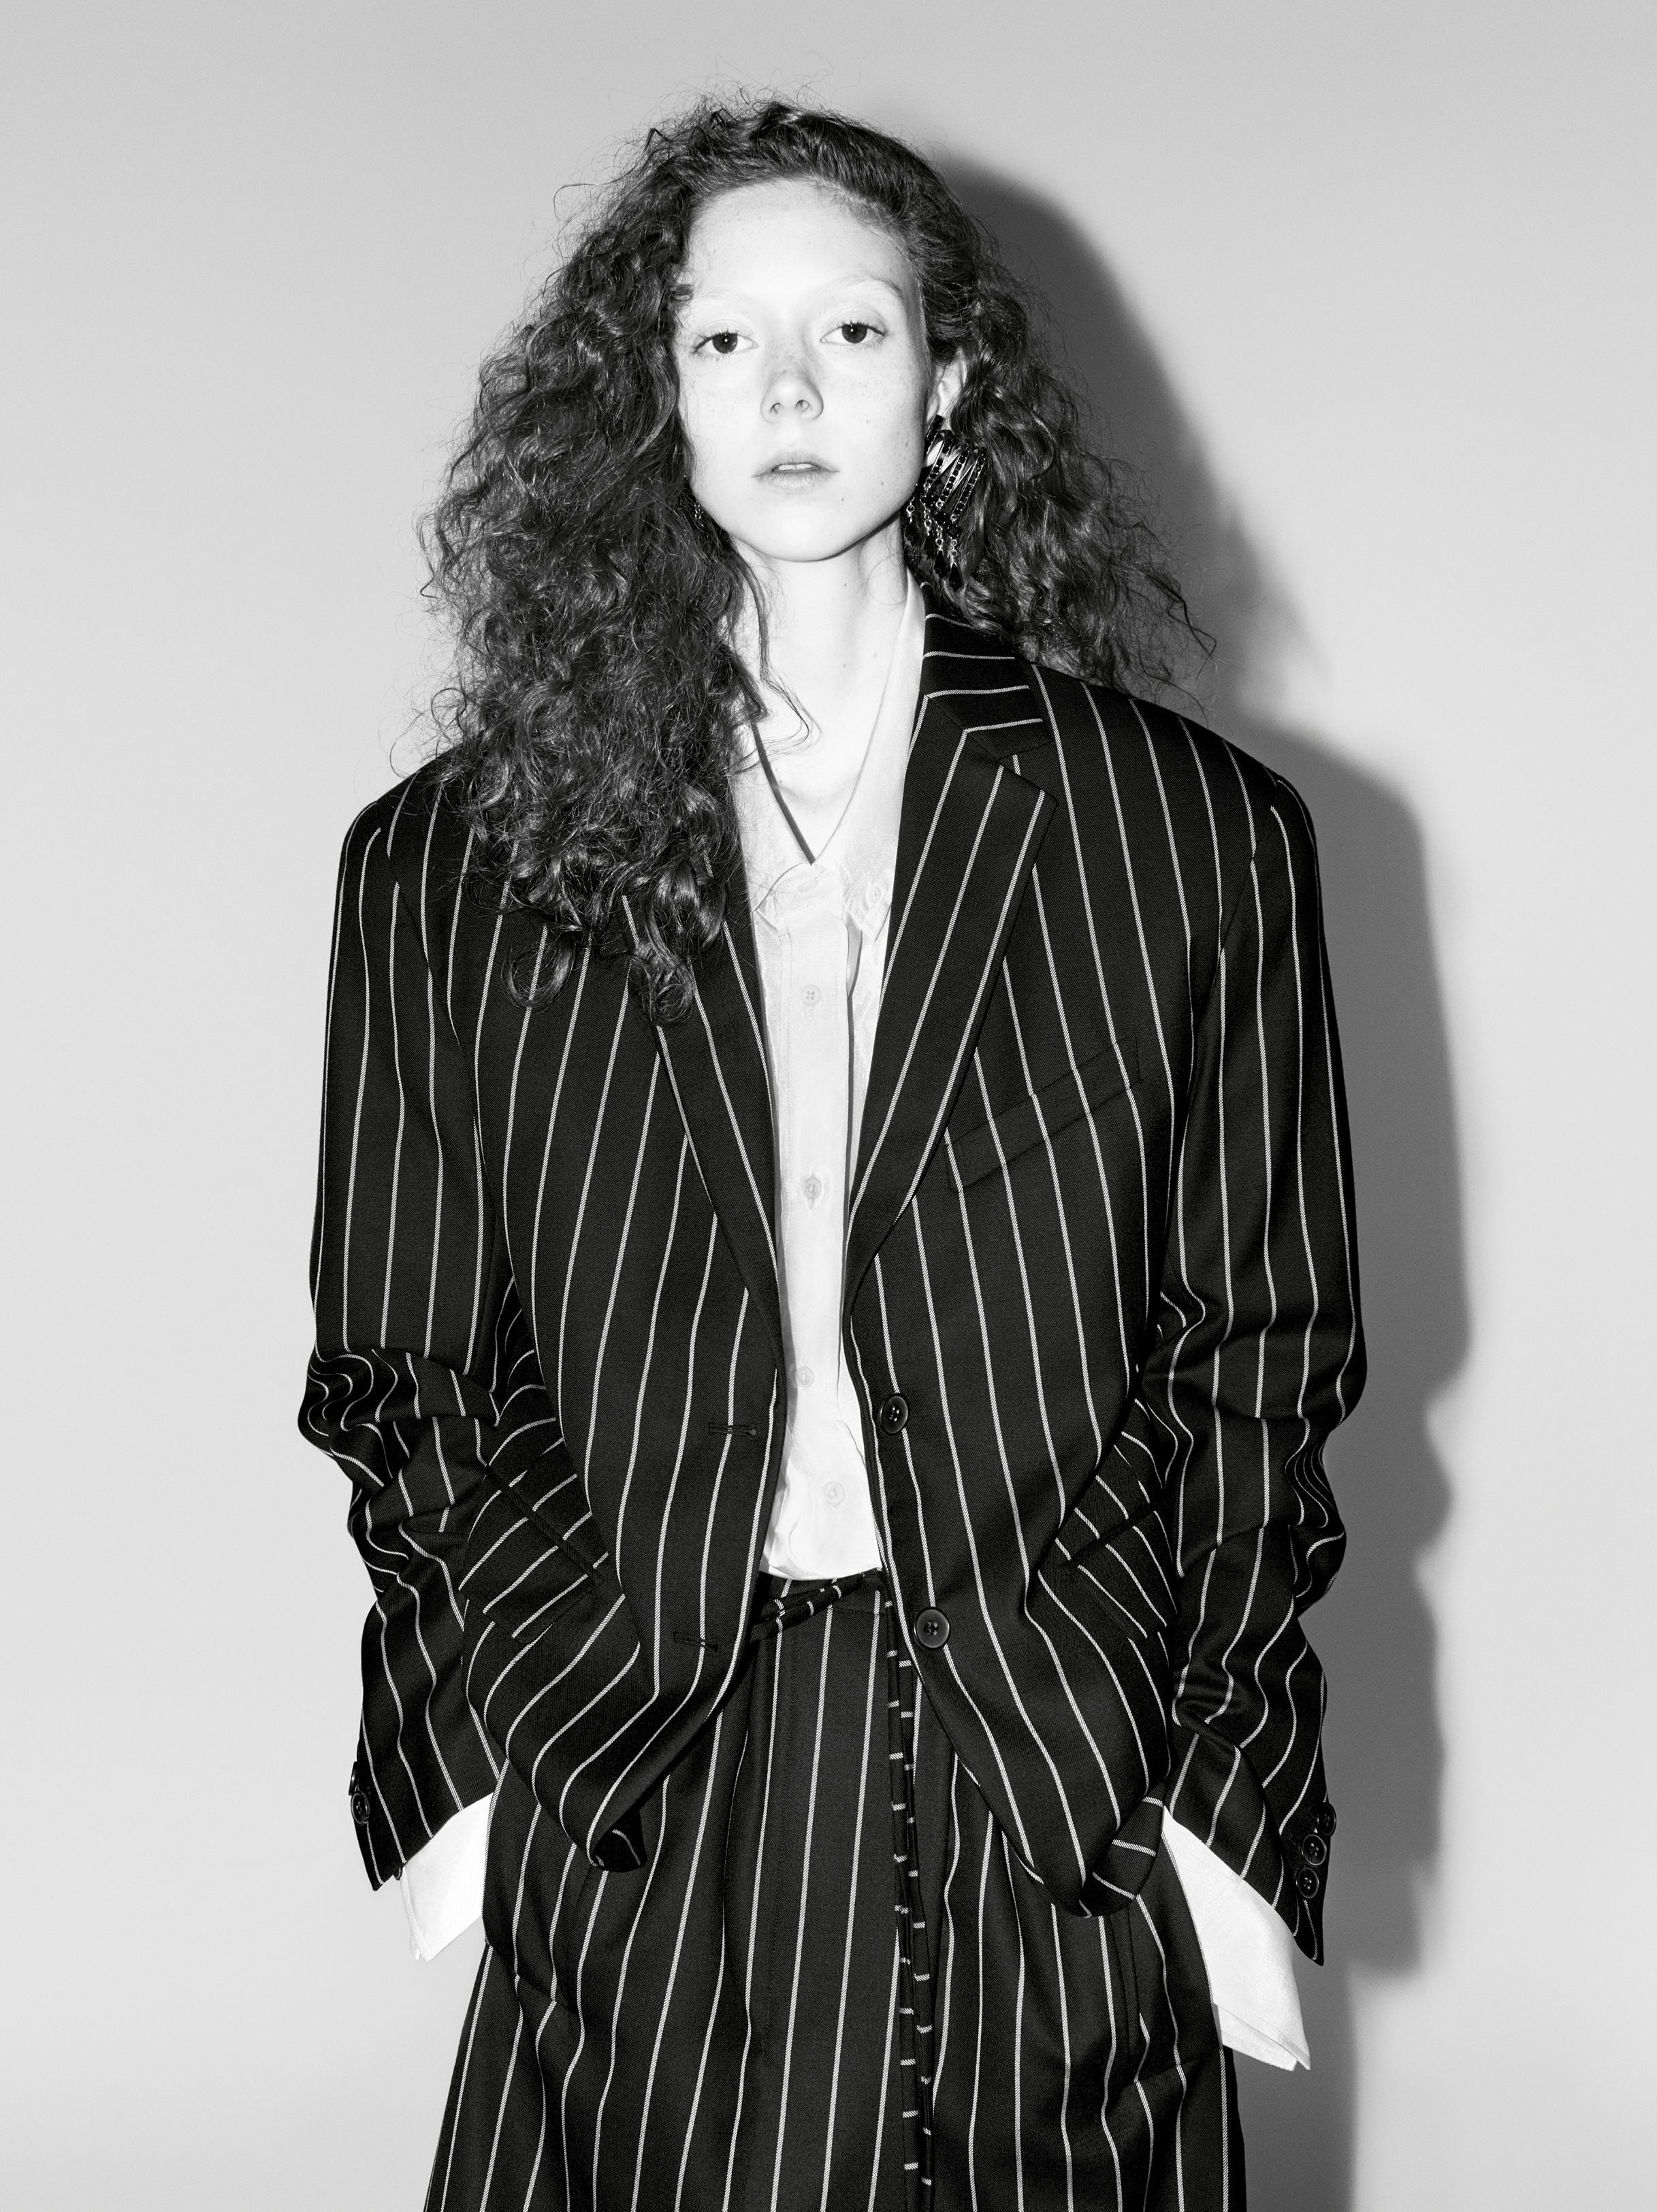 Jil Sander Unveils Spring/Summer 2017 Campaign with Natalie Westling -  Daily Front Row